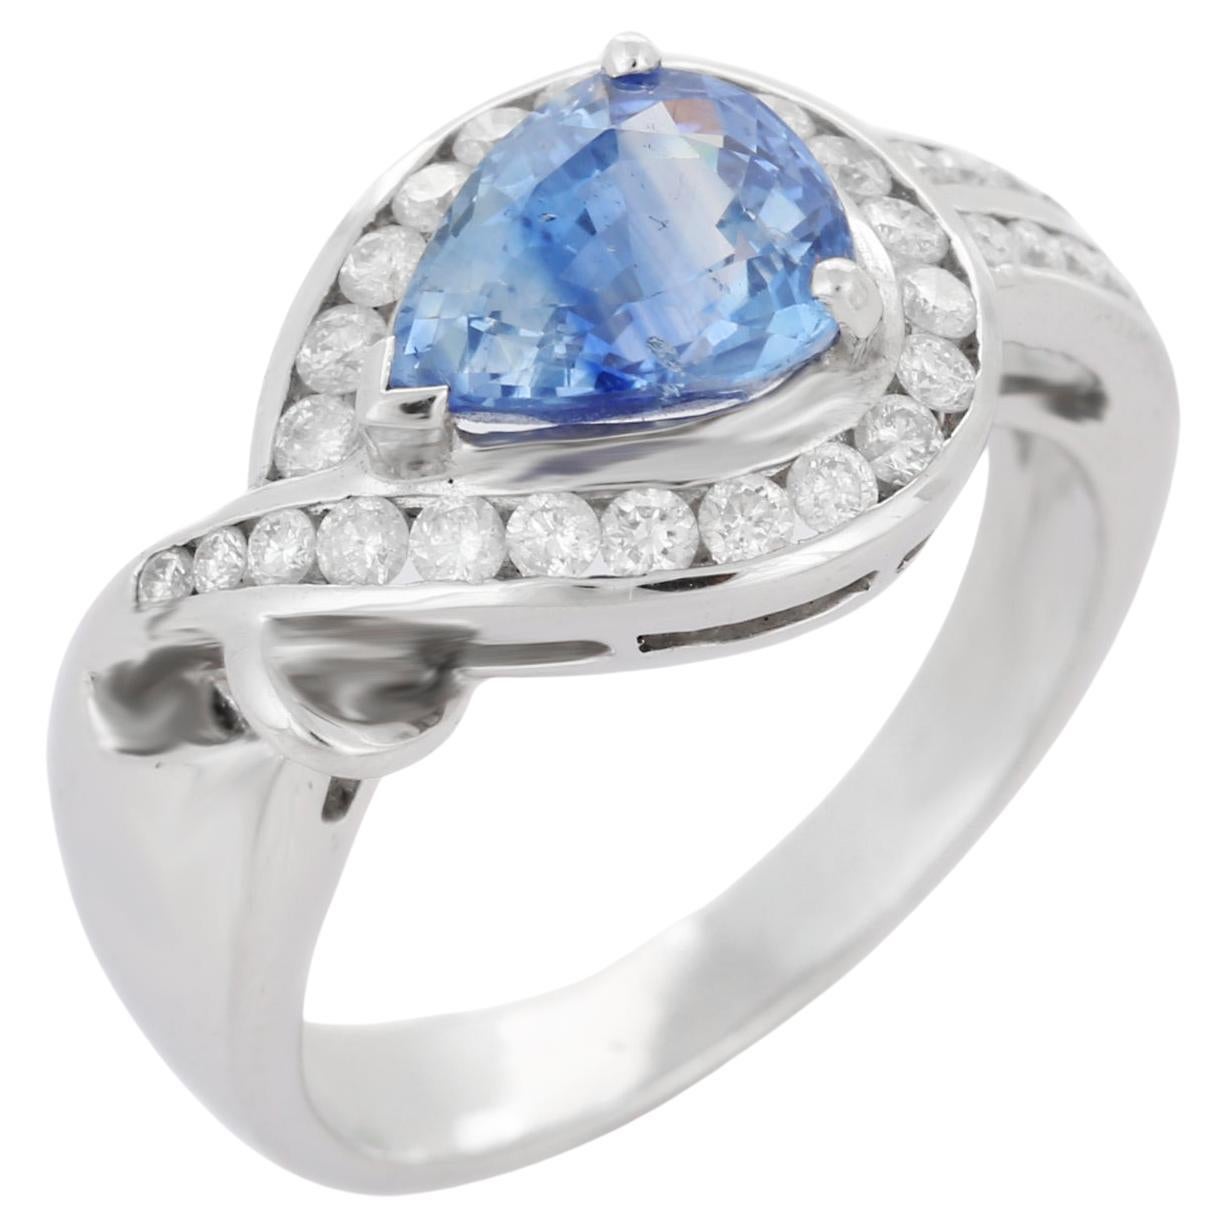 For Sale:  Pear Blue Sapphire and Diamond Wedding Ring Encased in Solid 18k White Gold